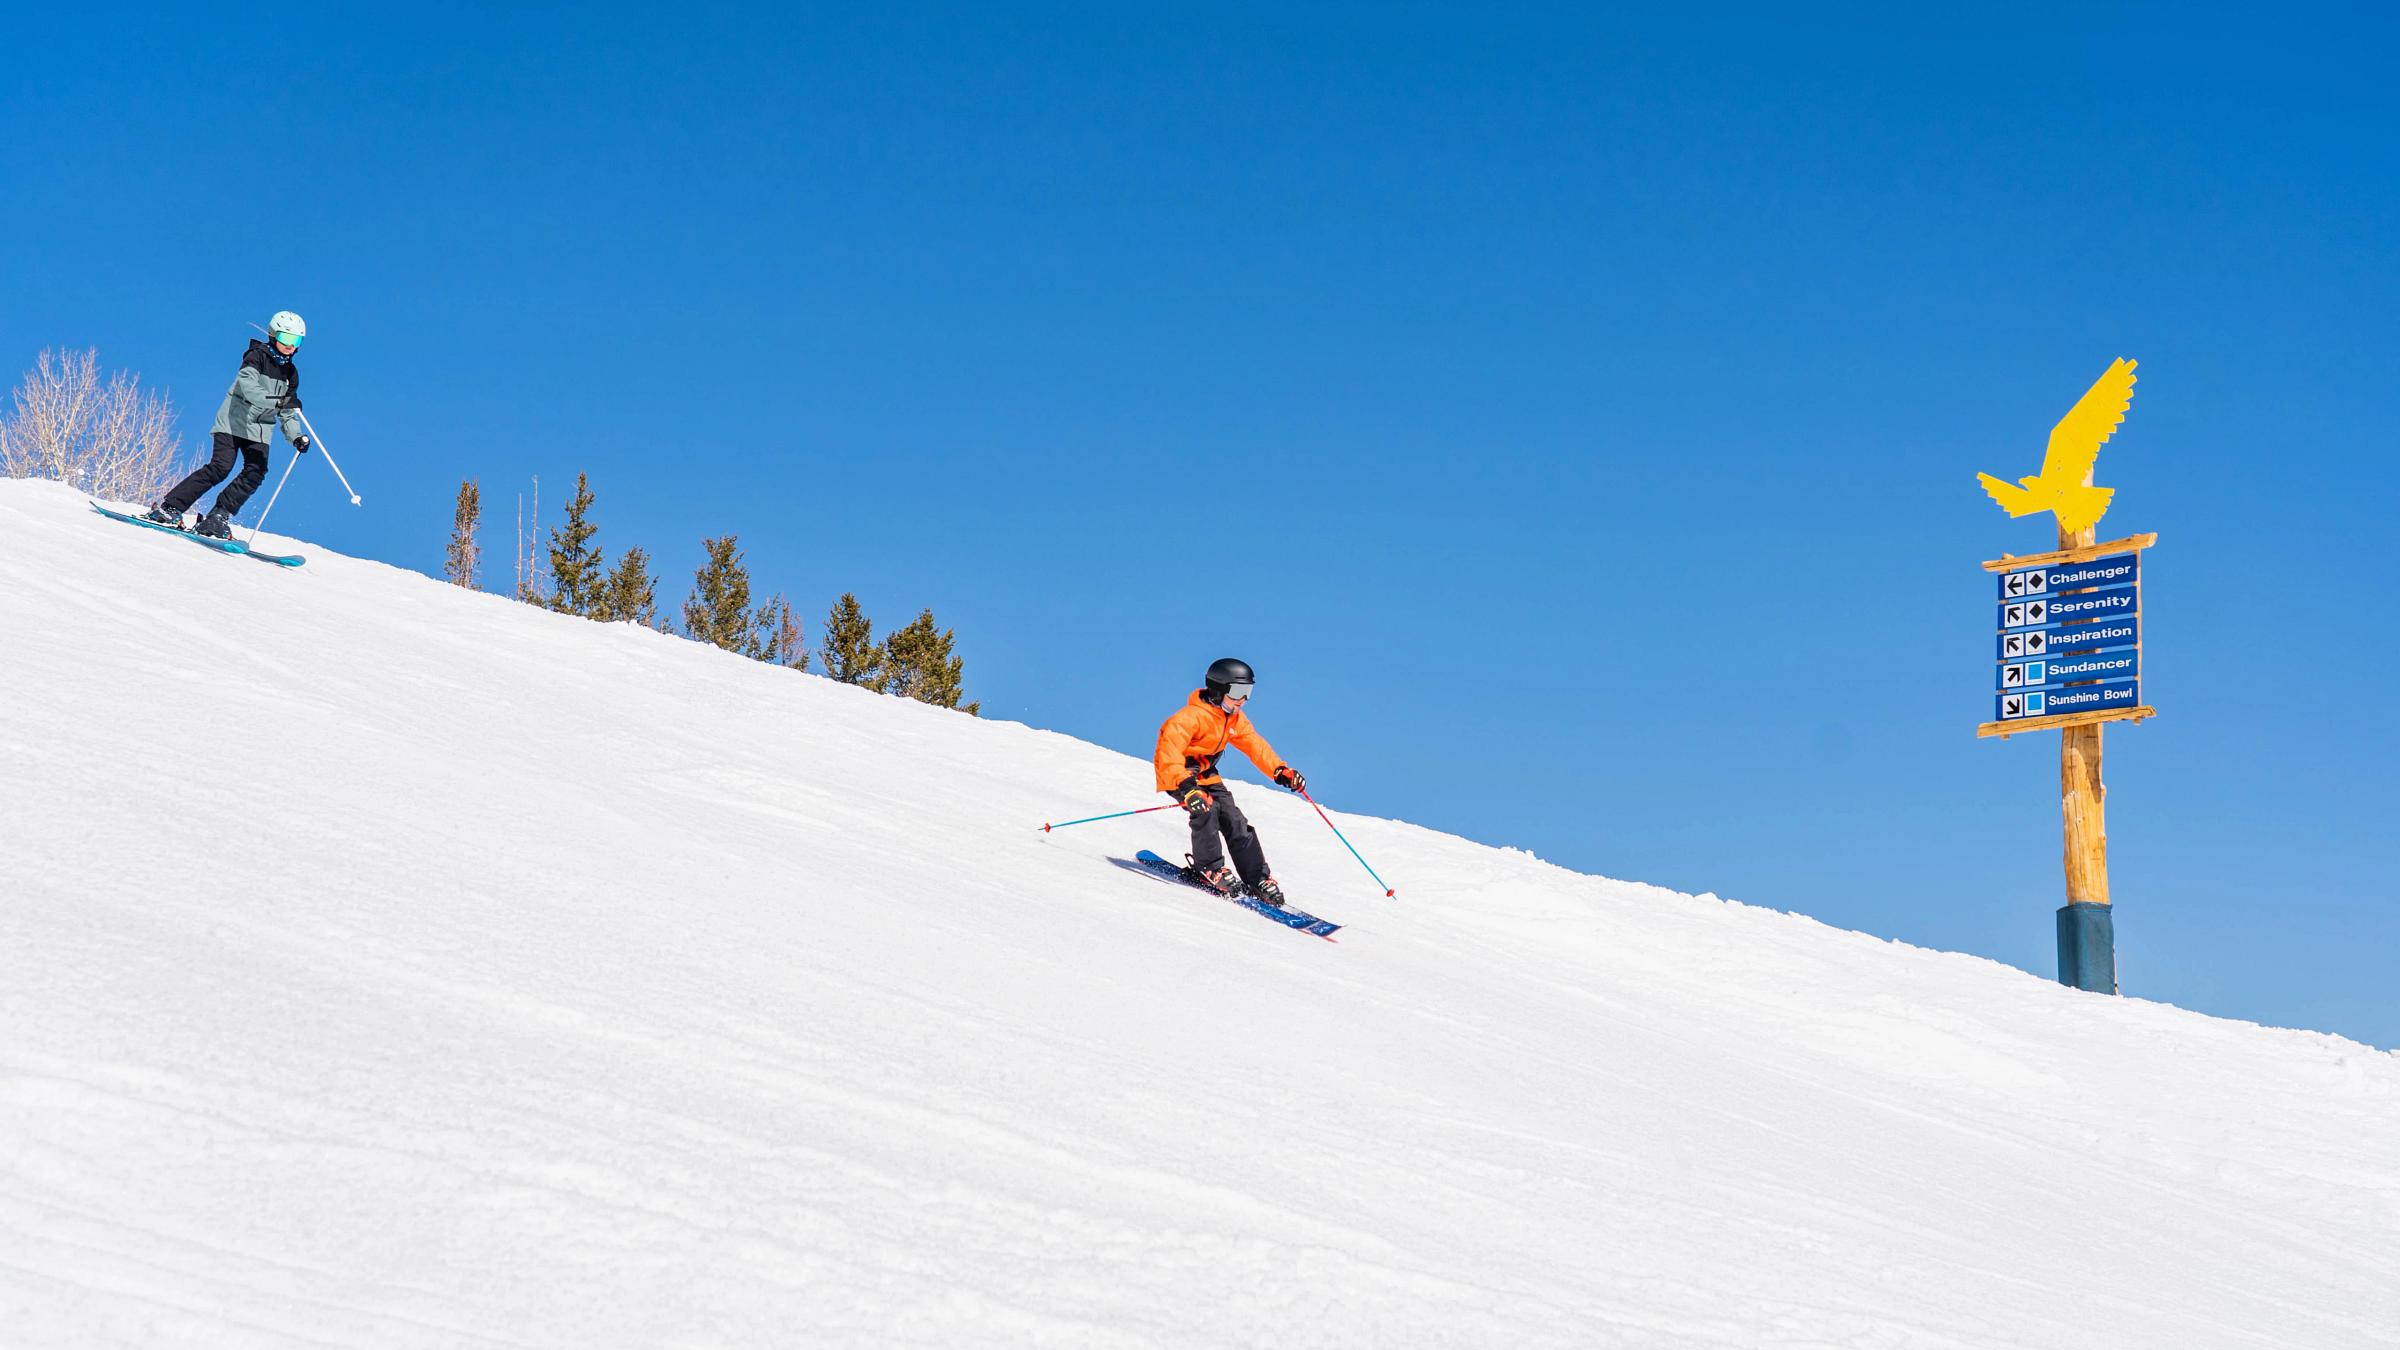 A family skiing together at Solitude Mountain Resort